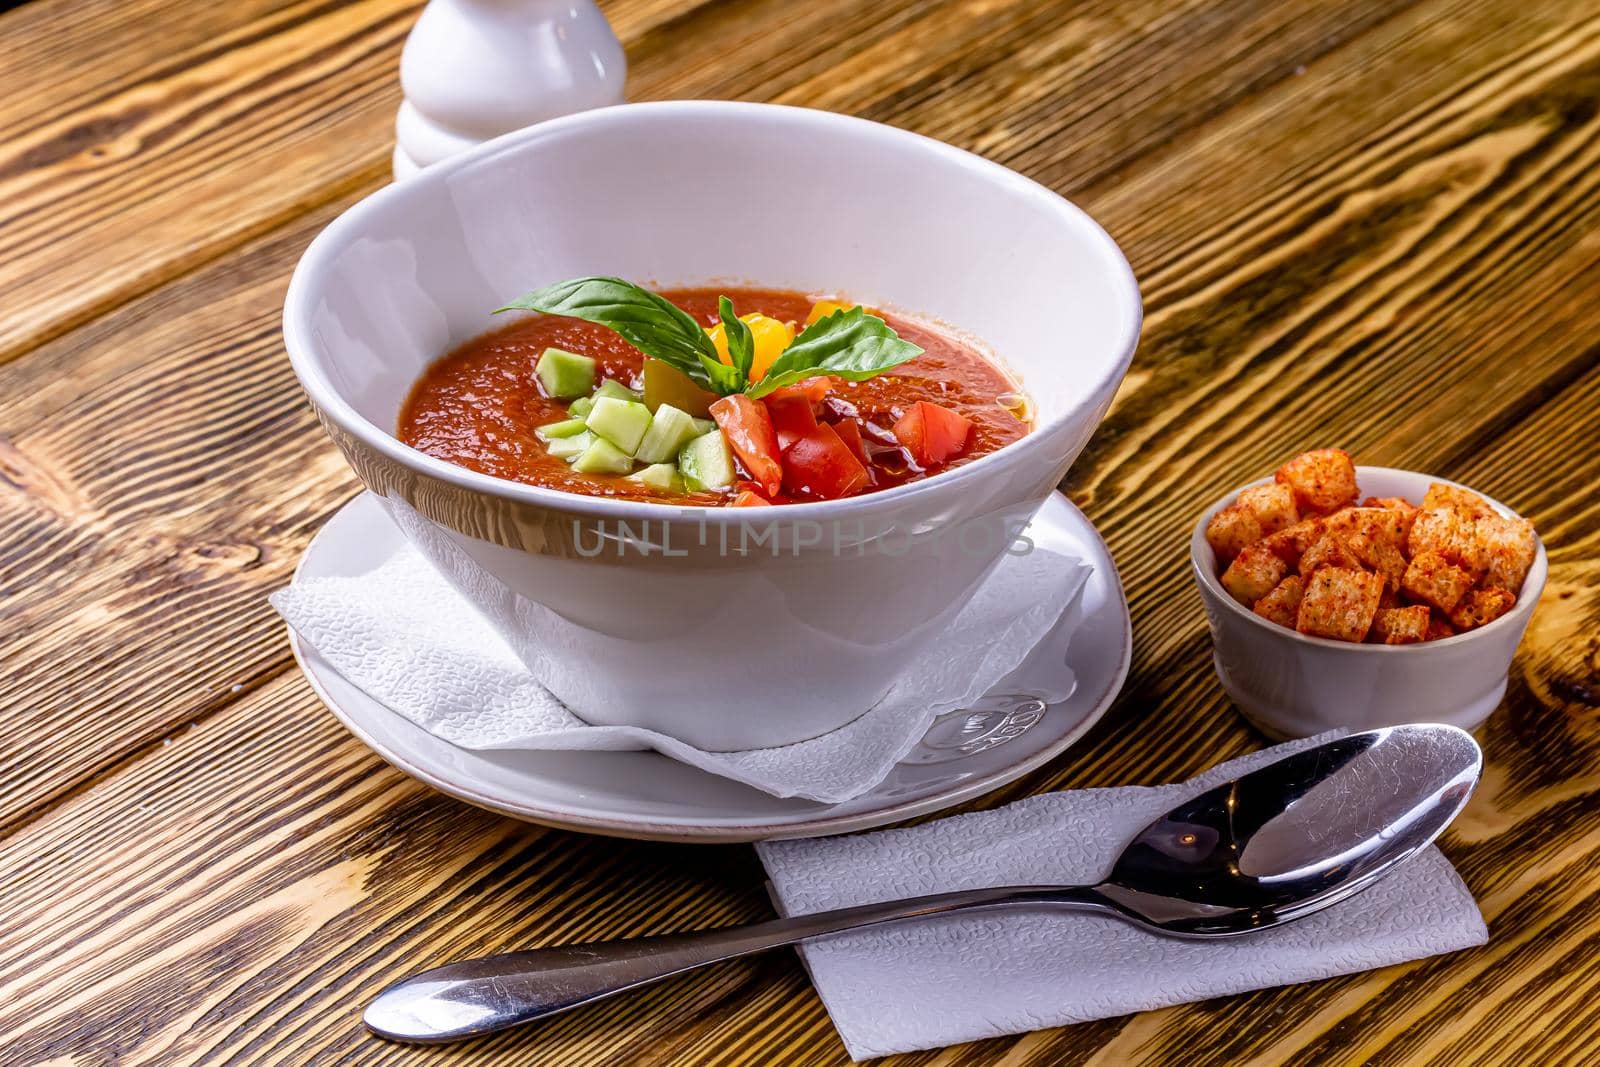 Raw tomato soup, typical food of Spain, served in white bowls with pieces of tomato, cucumber and paprika. Wooden background by Milanchikov